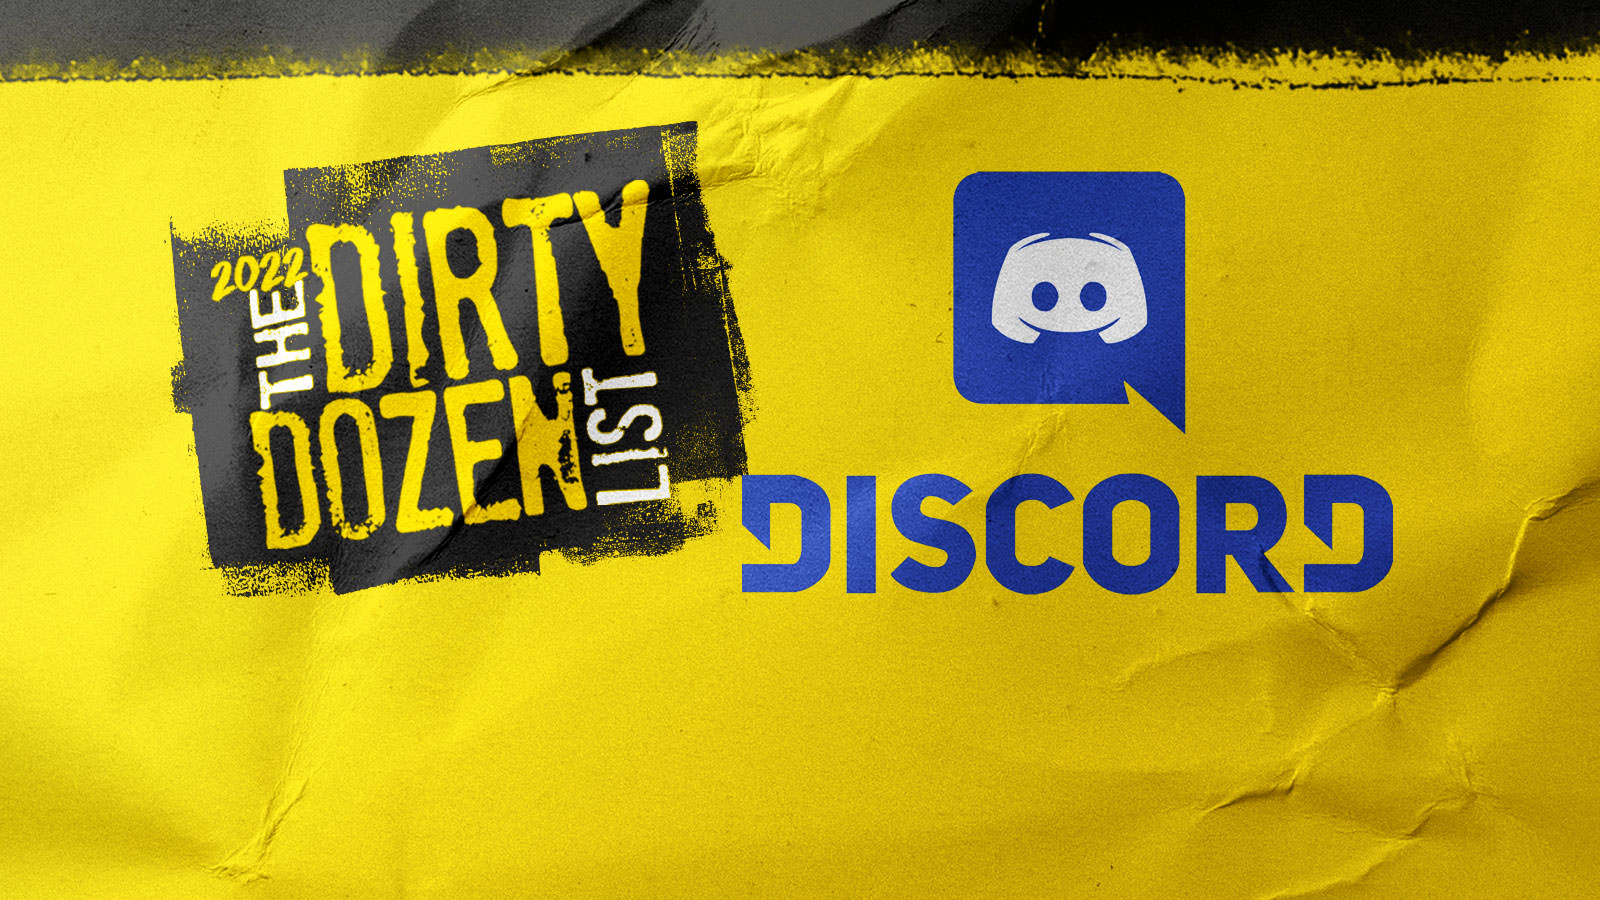 Discord is on the 2022 Dirty Dozen List from the National Center on Sexual Exploitation